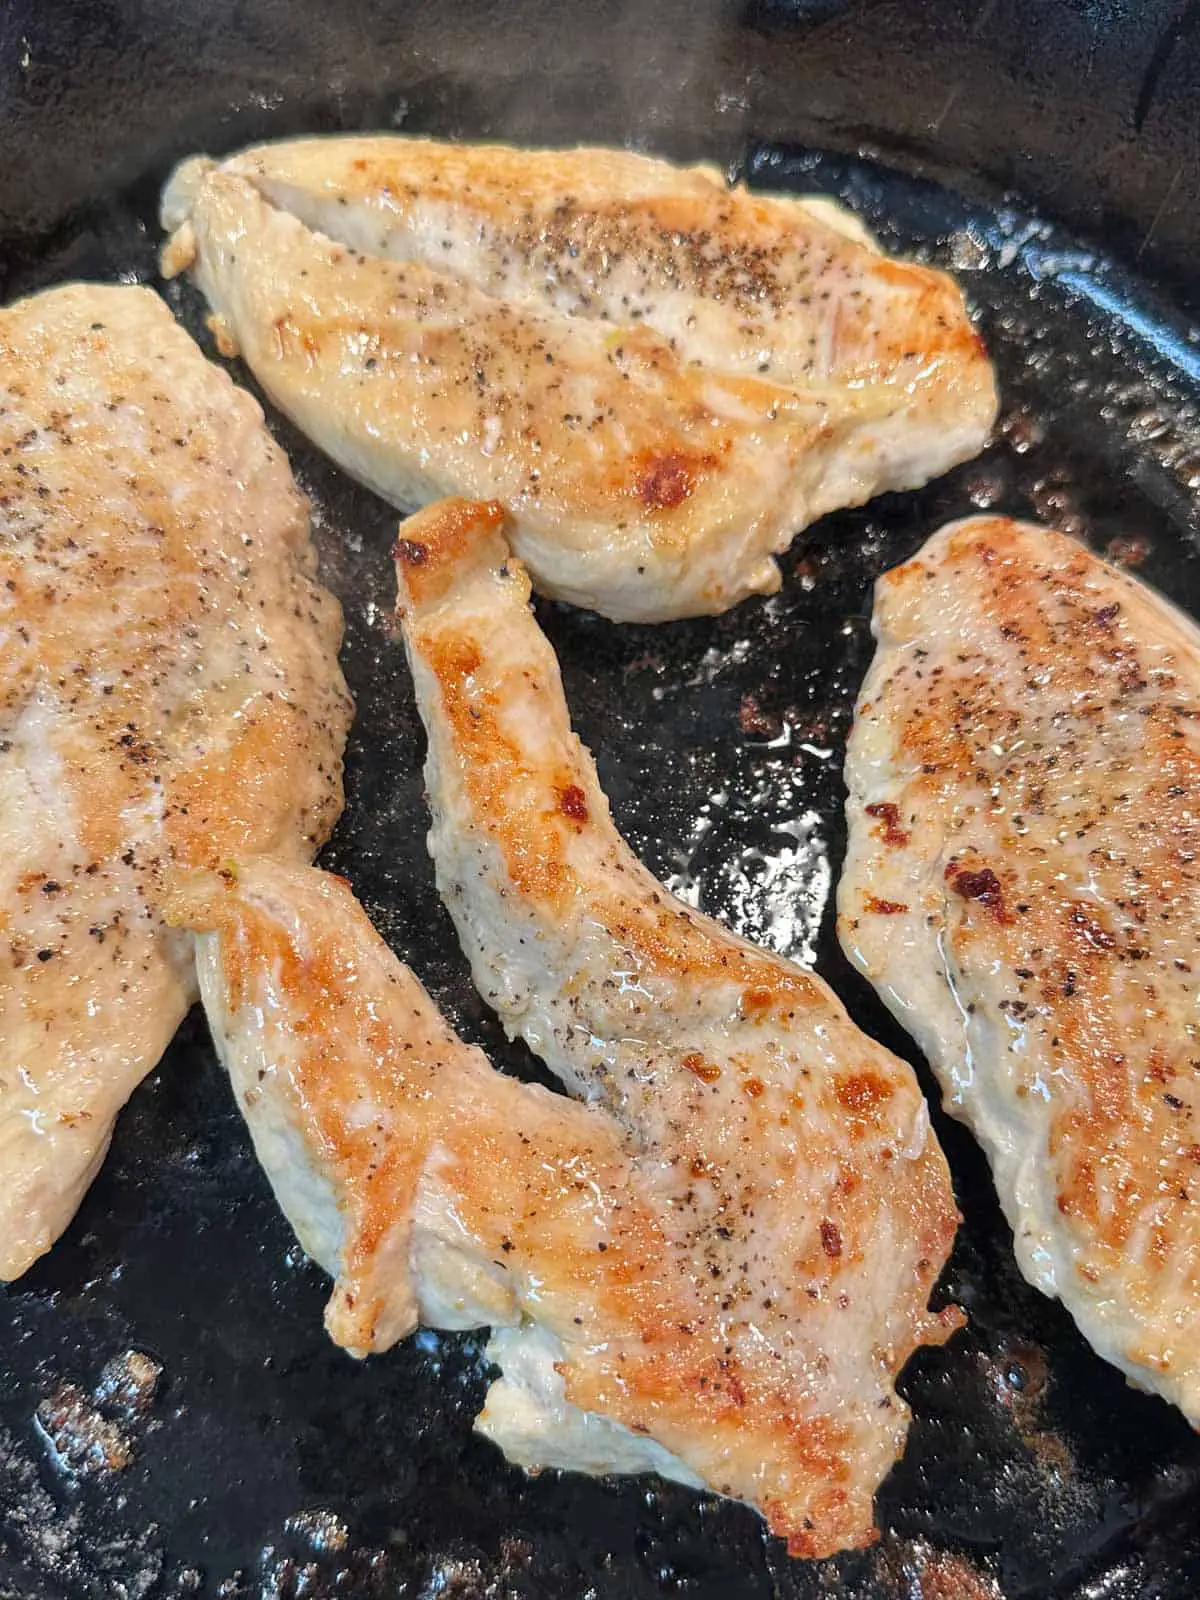 Browned pieces of chicken breast seasoned with pepper cooking in a cast iron pan.